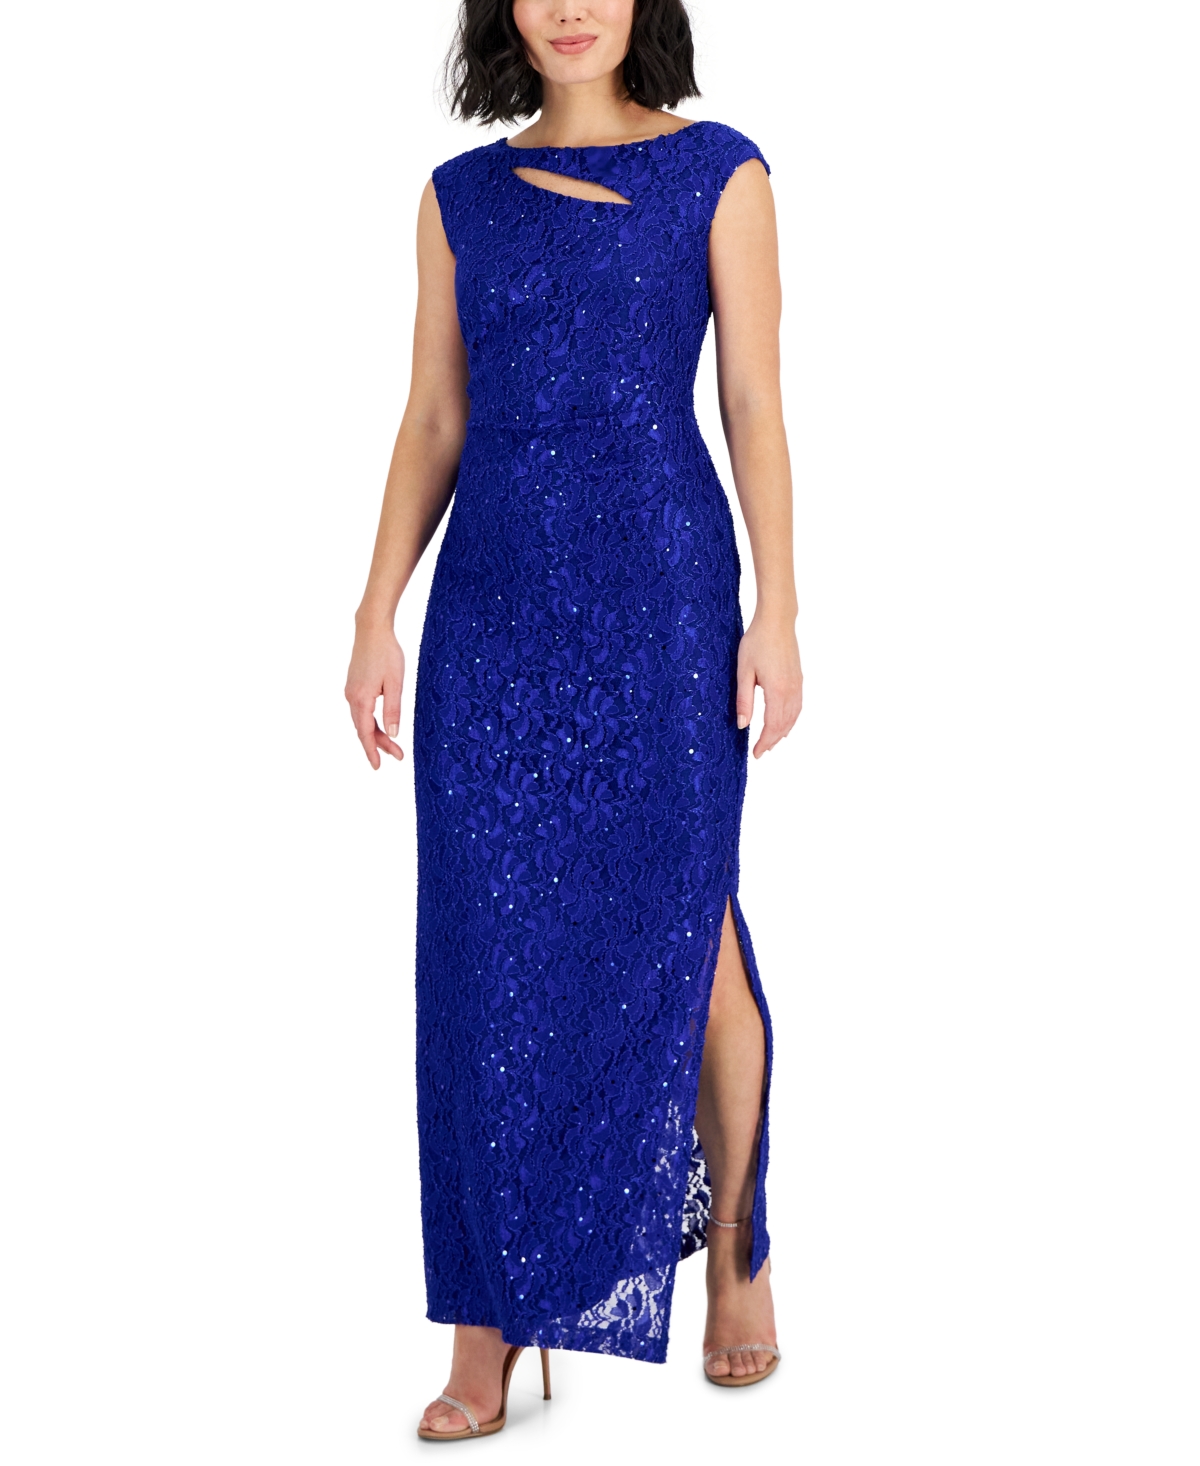 Petite Sleeveless Embellished Lace Gown - Cobalt Blue